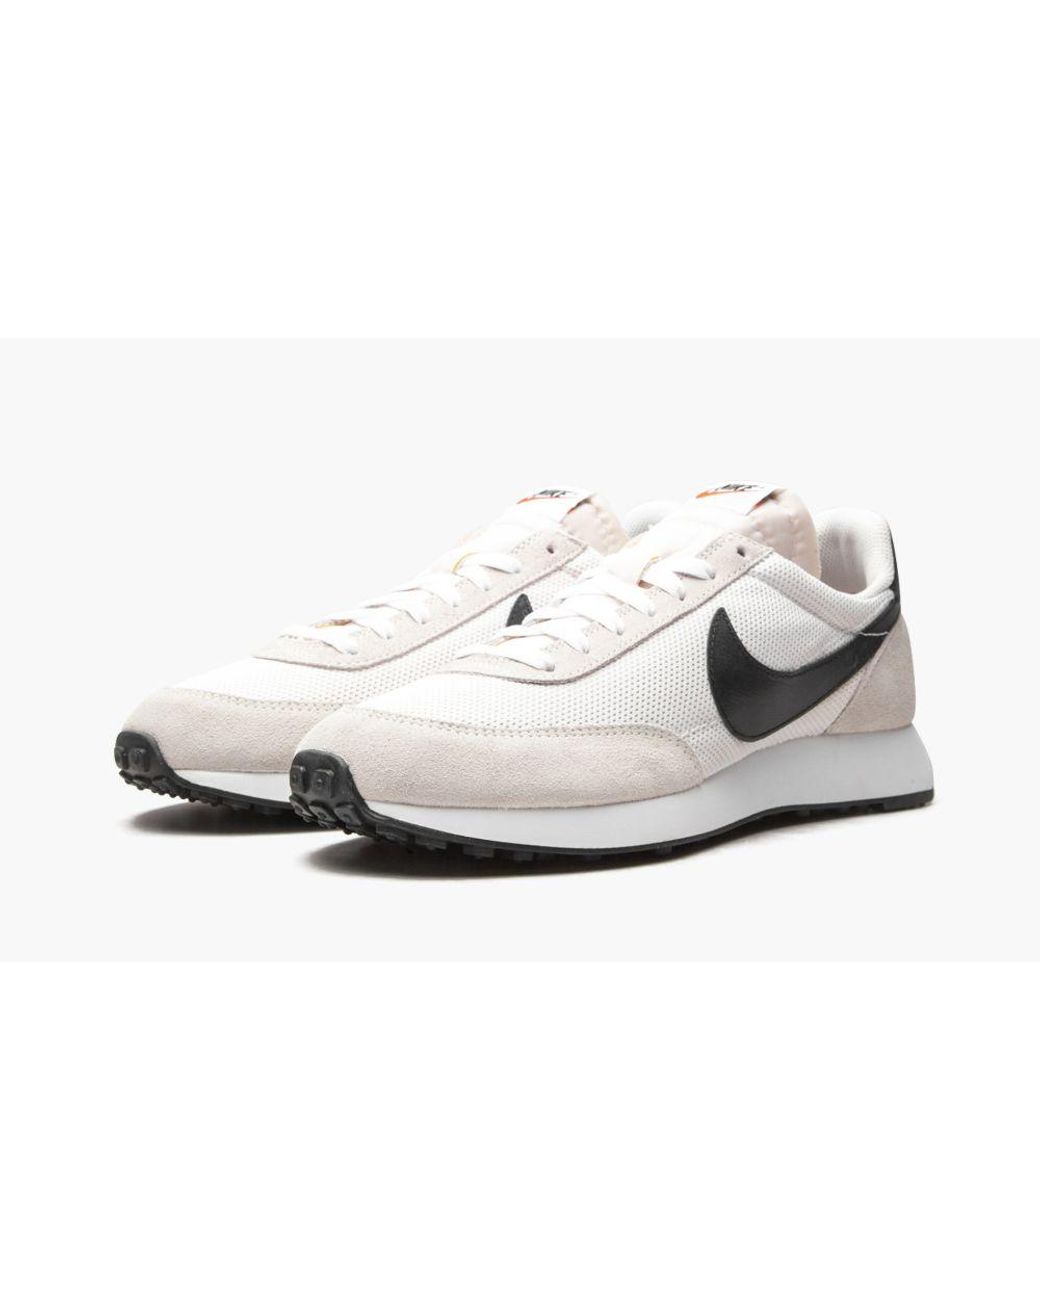 Nike Synthetic Air Tailwind 79 Og for Men - Save 42% | Lyst